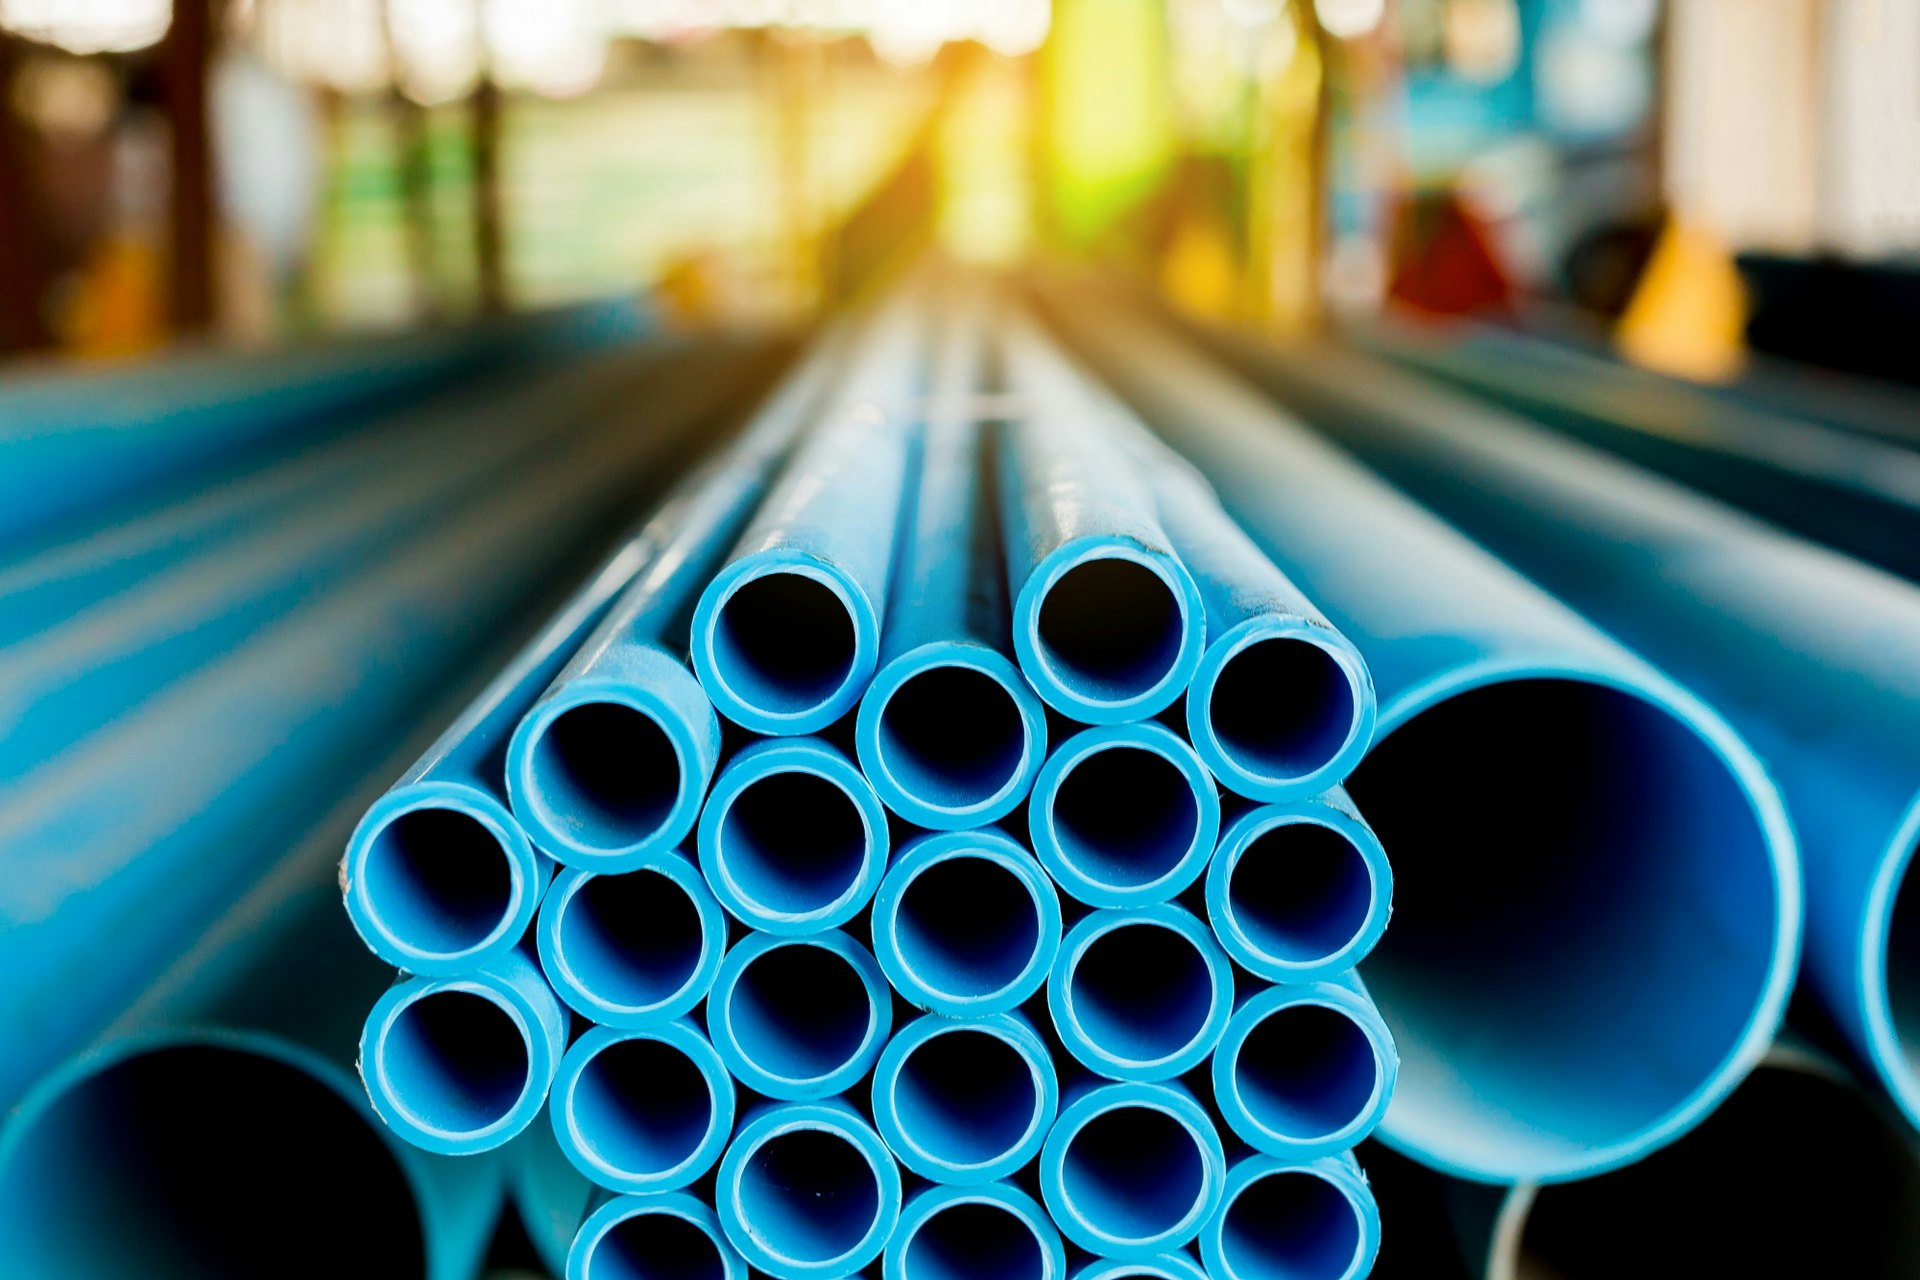 Common Uses of PVC Piping in Construction Environments | For ...